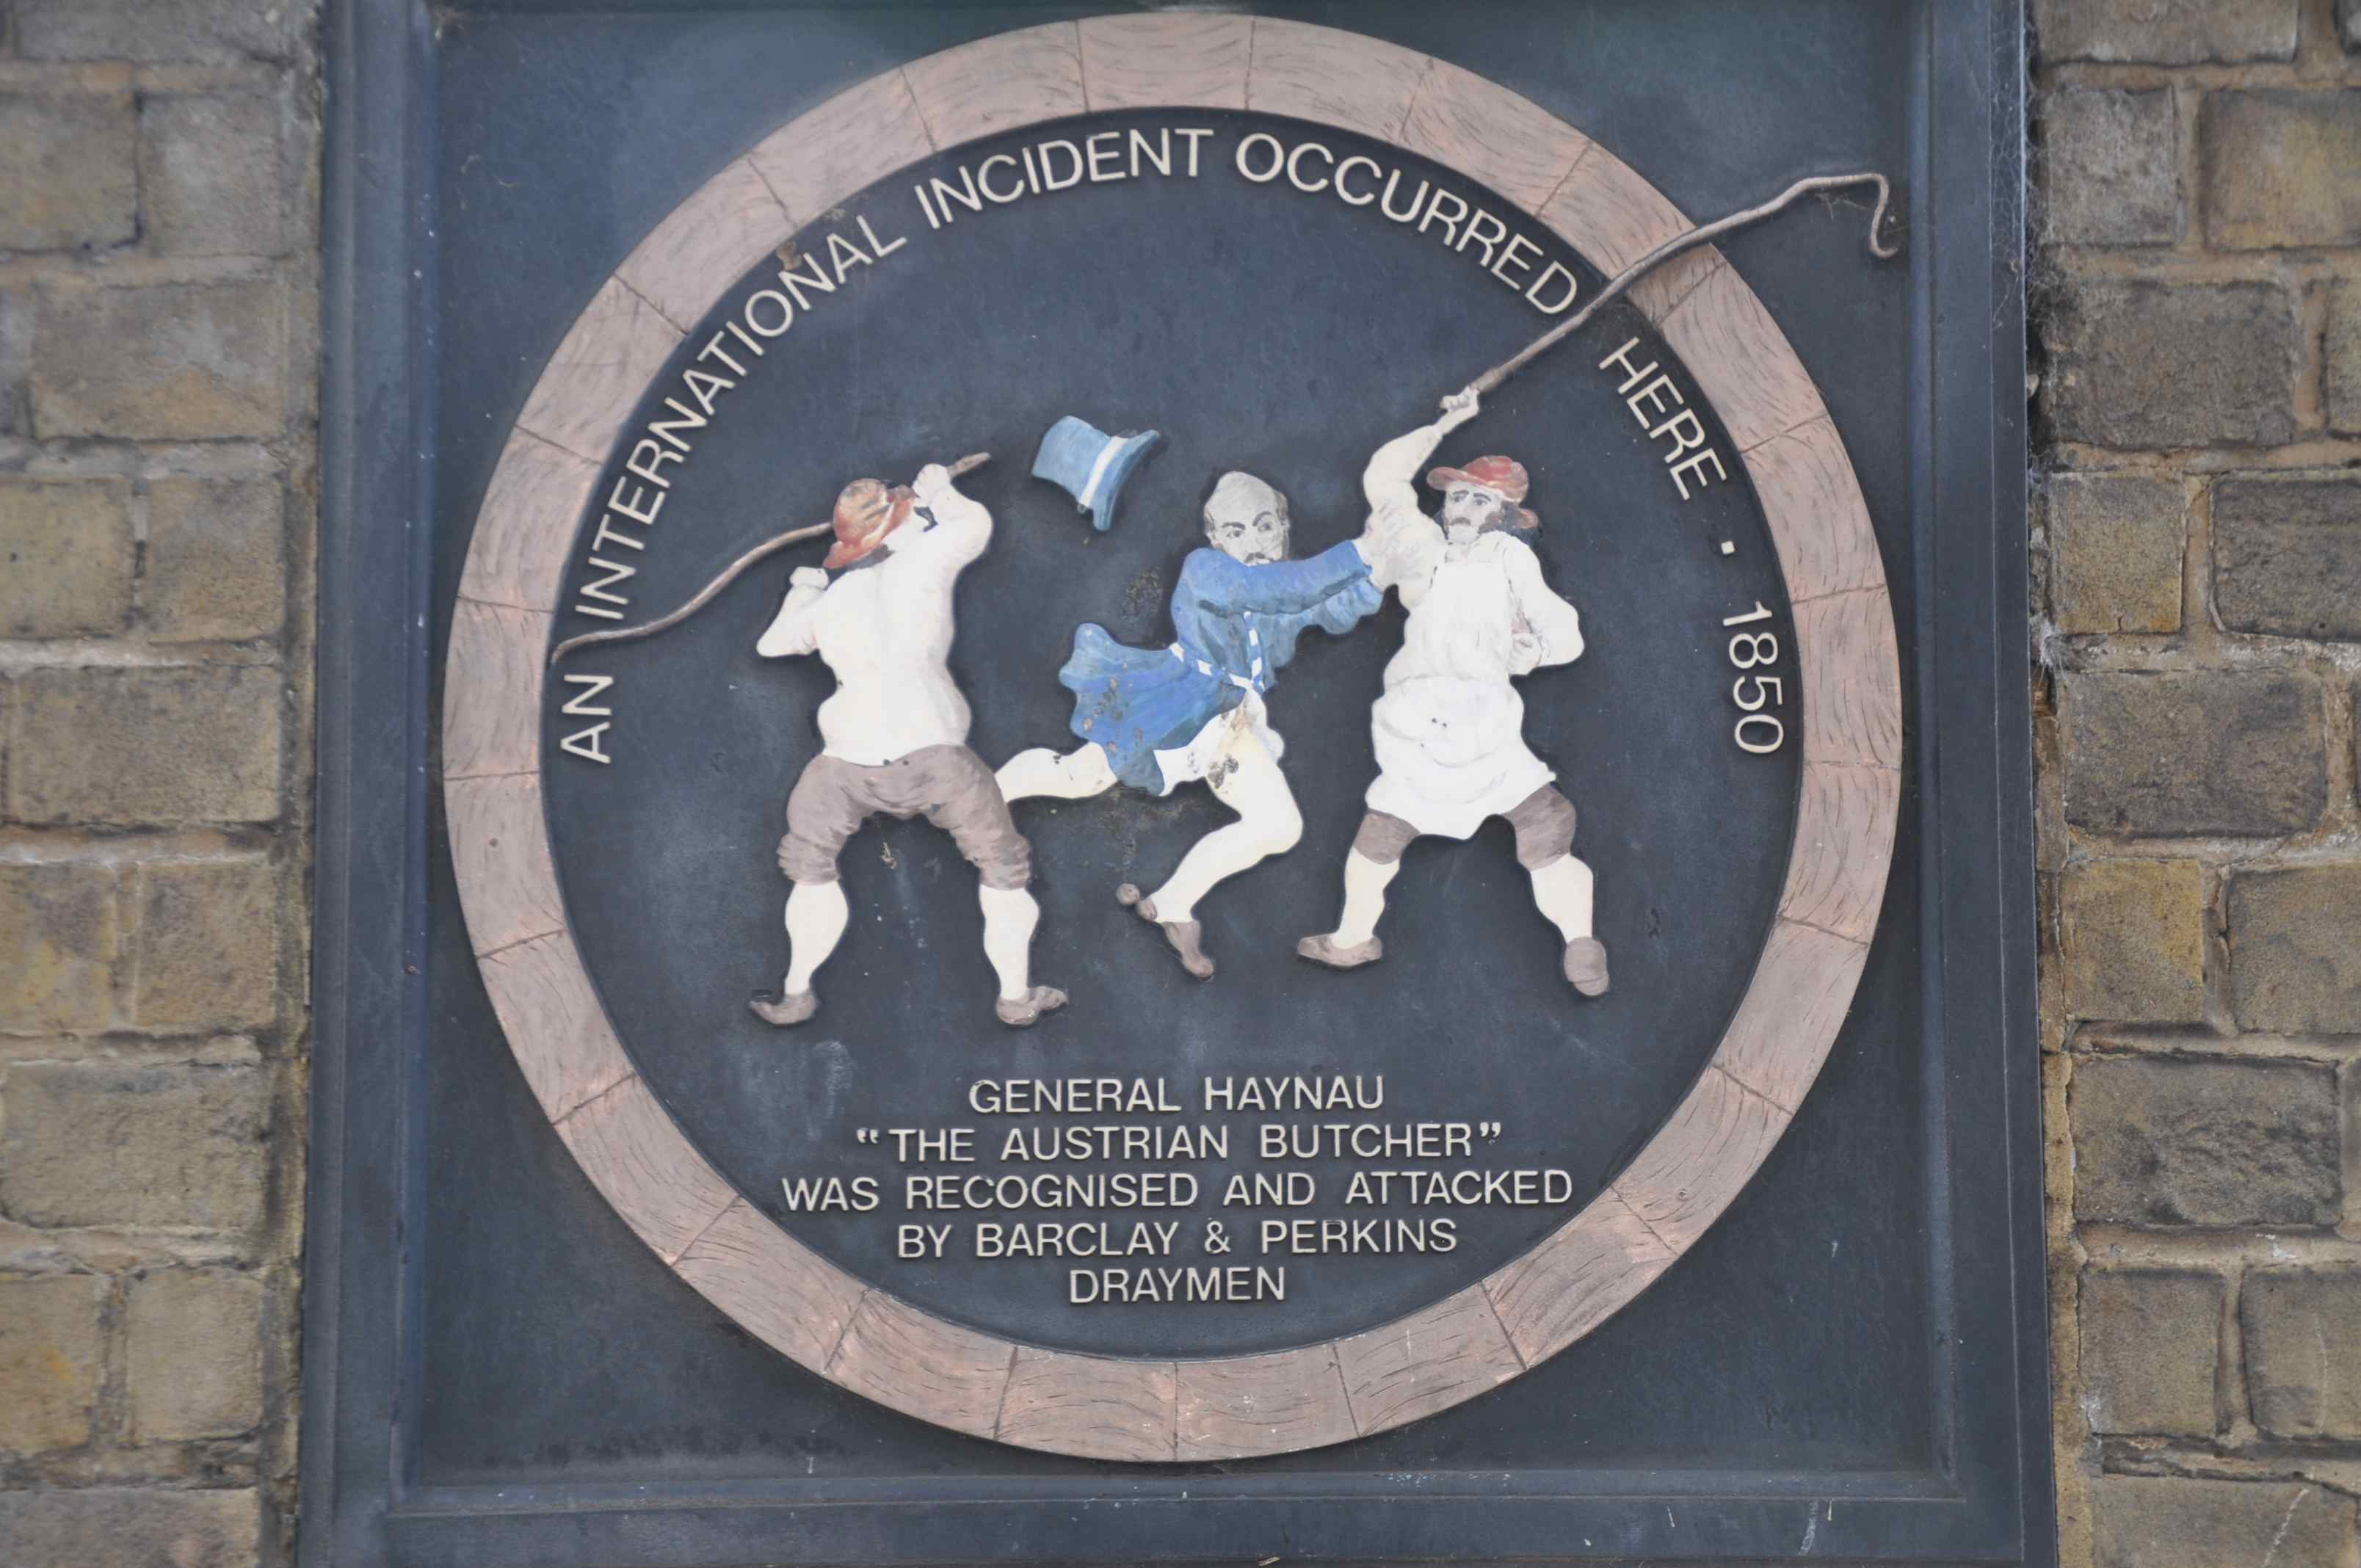 Plaque commemorating an historic beat-down